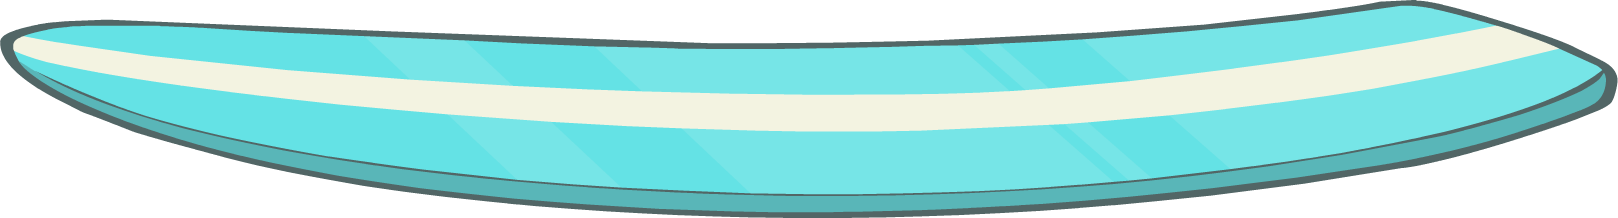 Image   Teen Beach Movie Summer Jam Pre Homepage Surfboard Blue.png | Club Penguin Wiki | Fandom Powered By Wikia - Surfboard, Transparent background PNG HD thumbnail